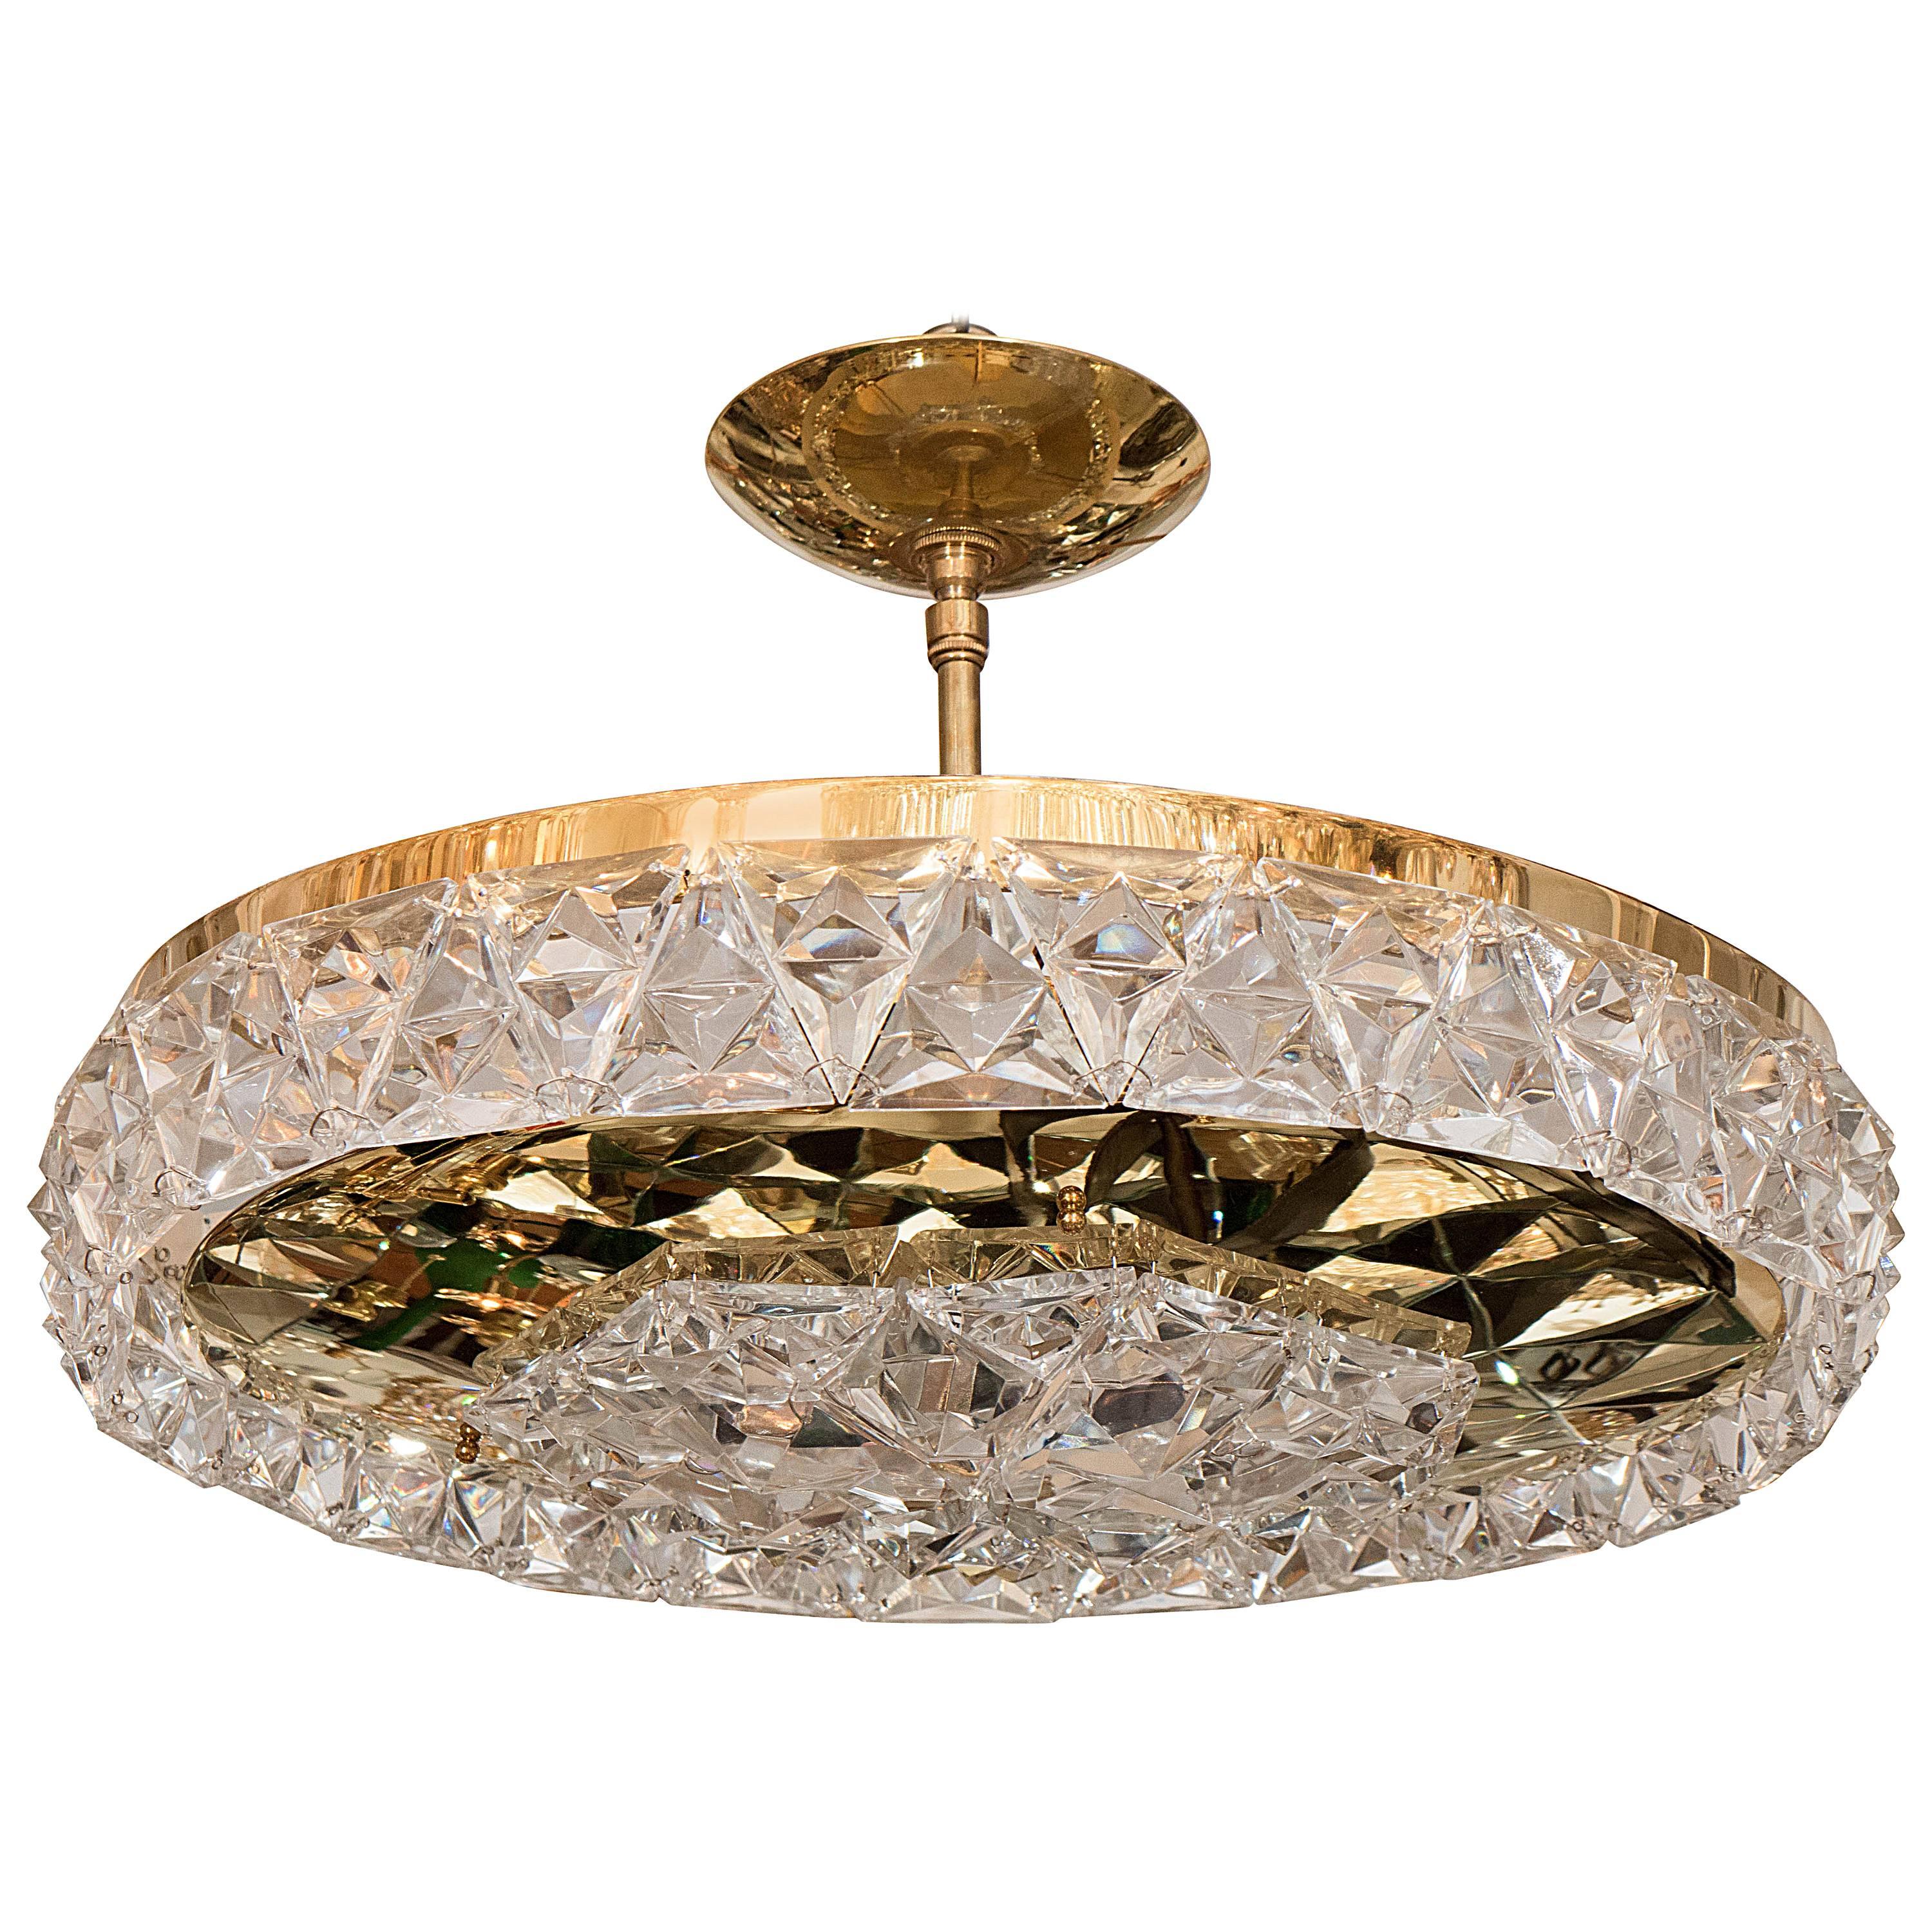 Round Polished Brass Ceiling Fixture with Facet Cut Crystal Surround